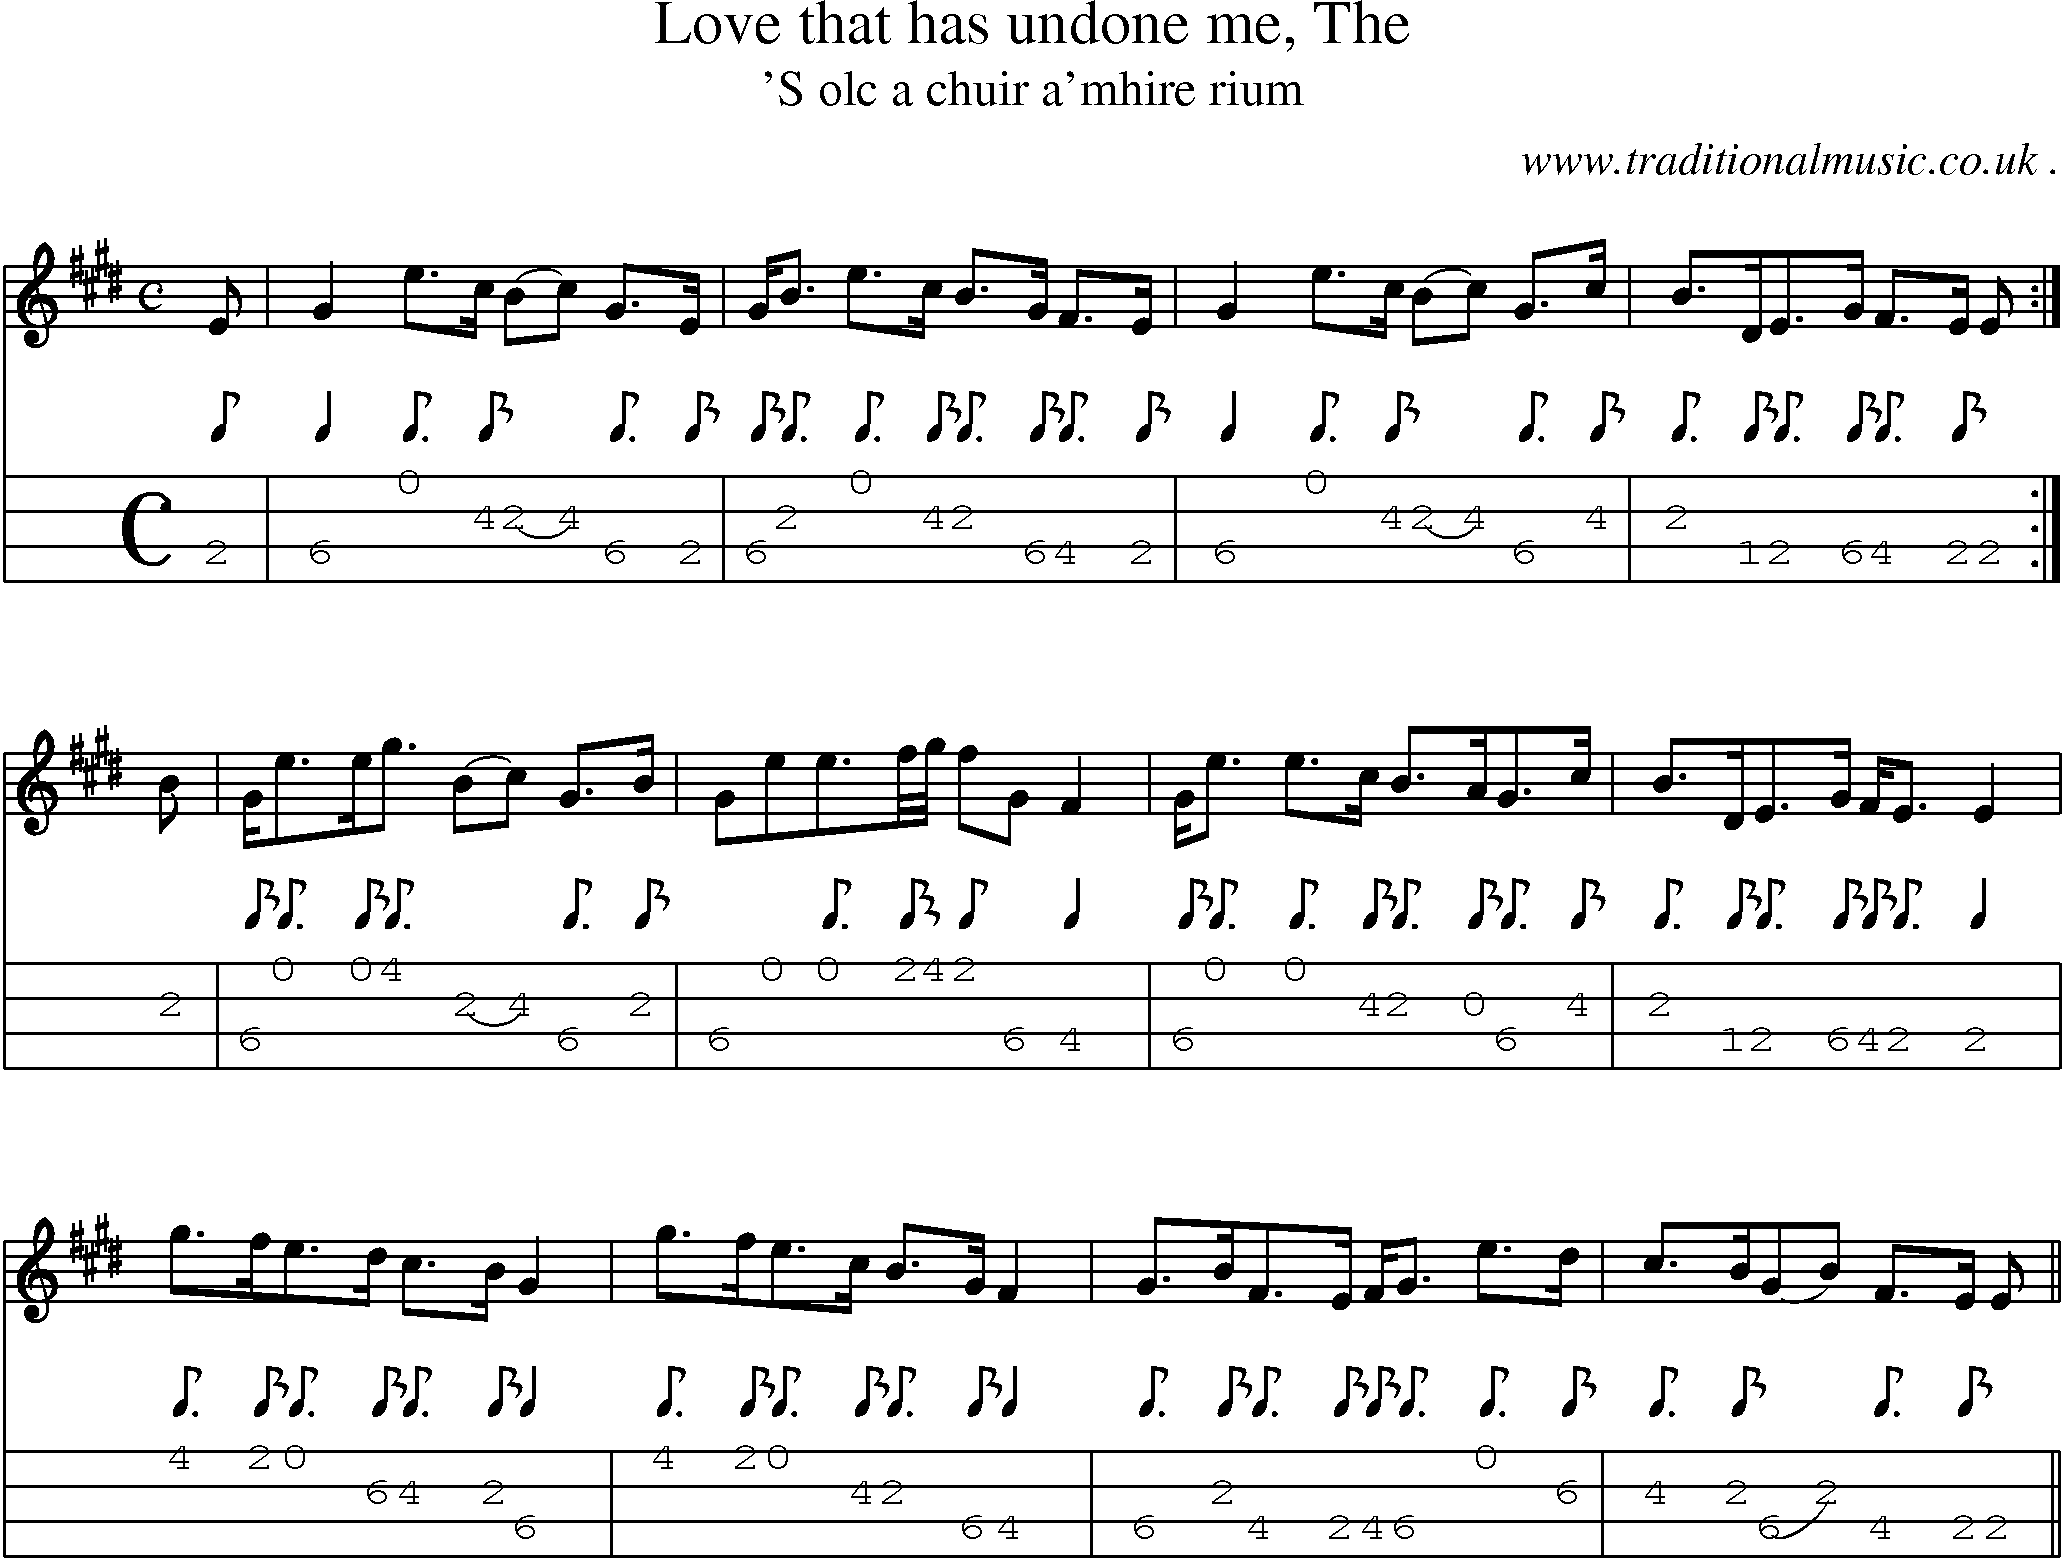 Sheet-music  score, Chords and Mandolin Tabs for Love That Has Undone Me The